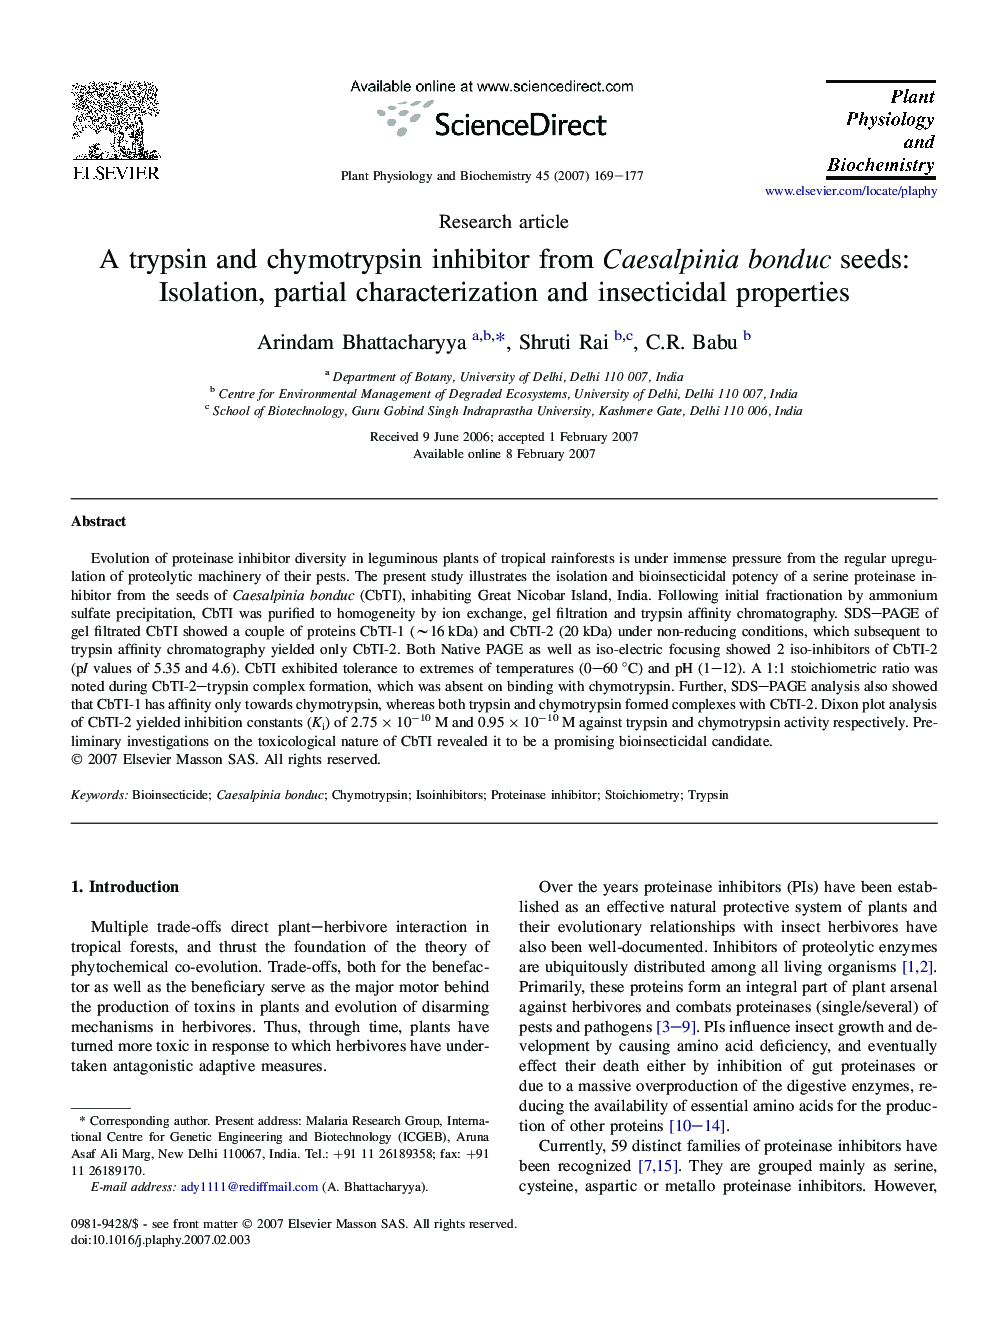 A trypsin and chymotrypsin inhibitor from Caesalpinia bonduc seeds: Isolation, partial characterization and insecticidal properties